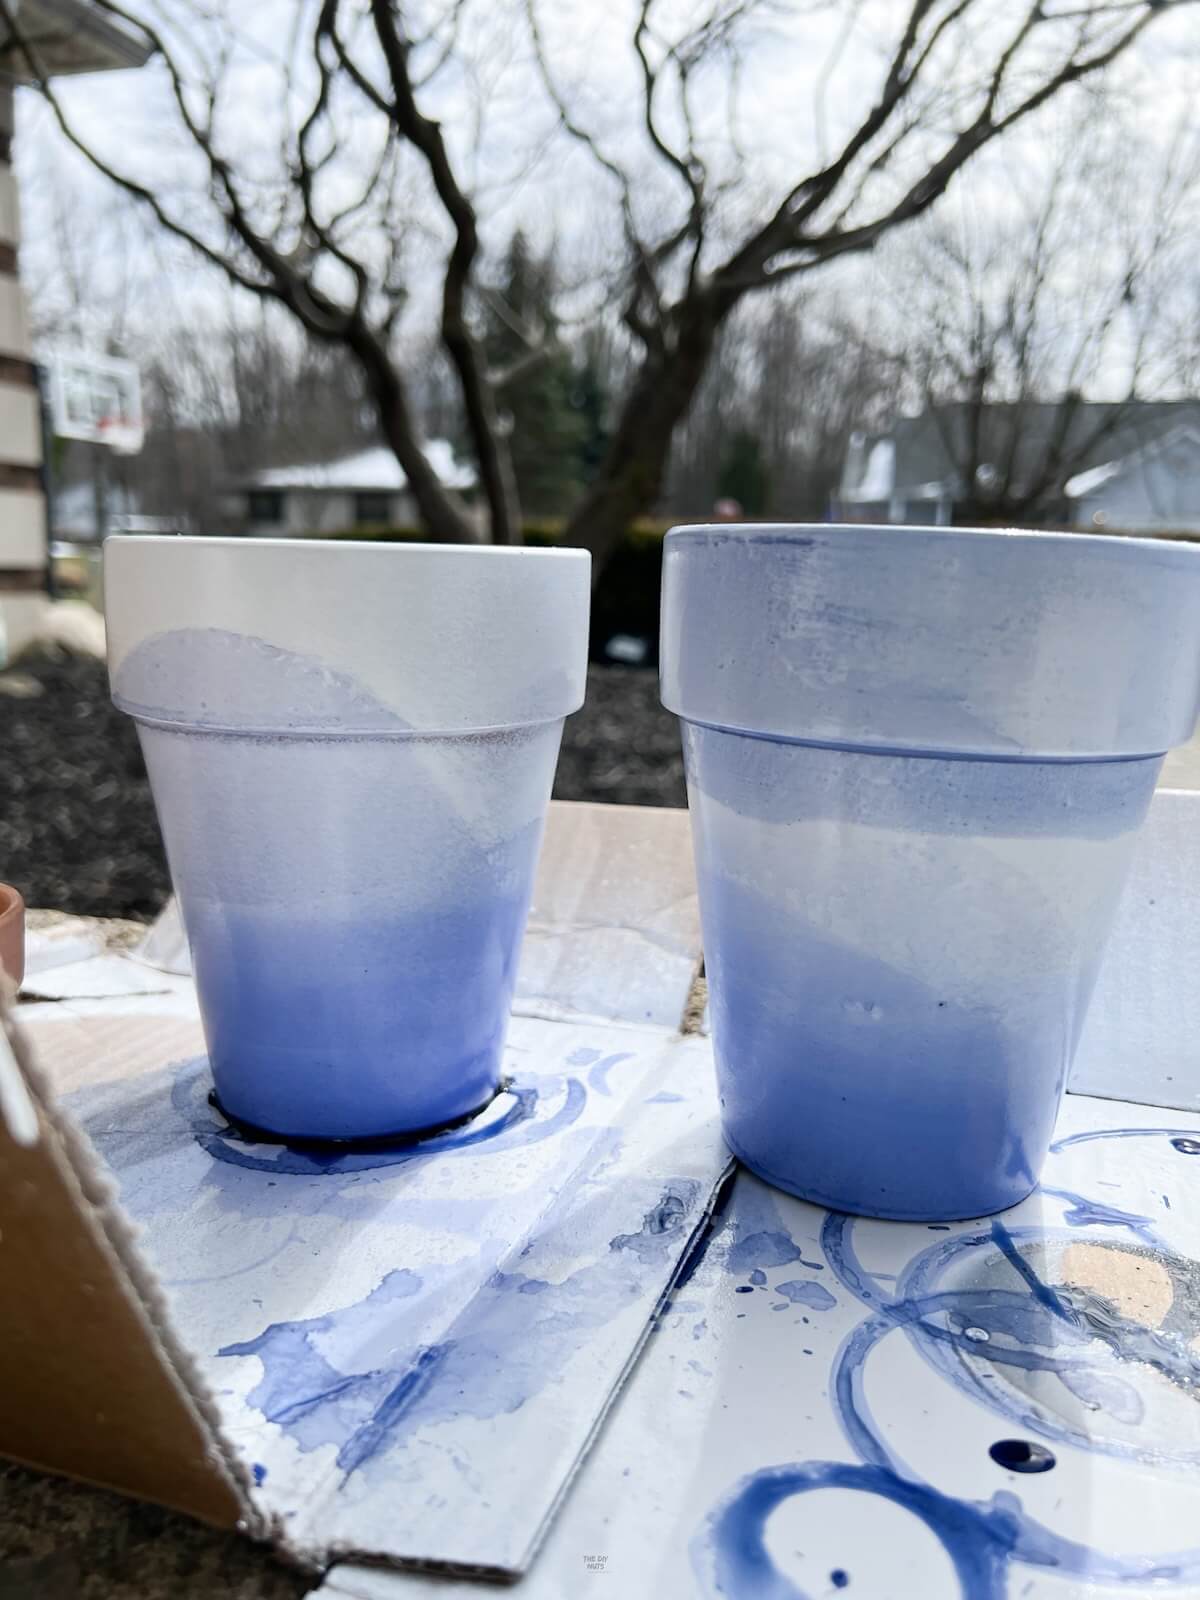 painted flower pots drying on cardboard outside.